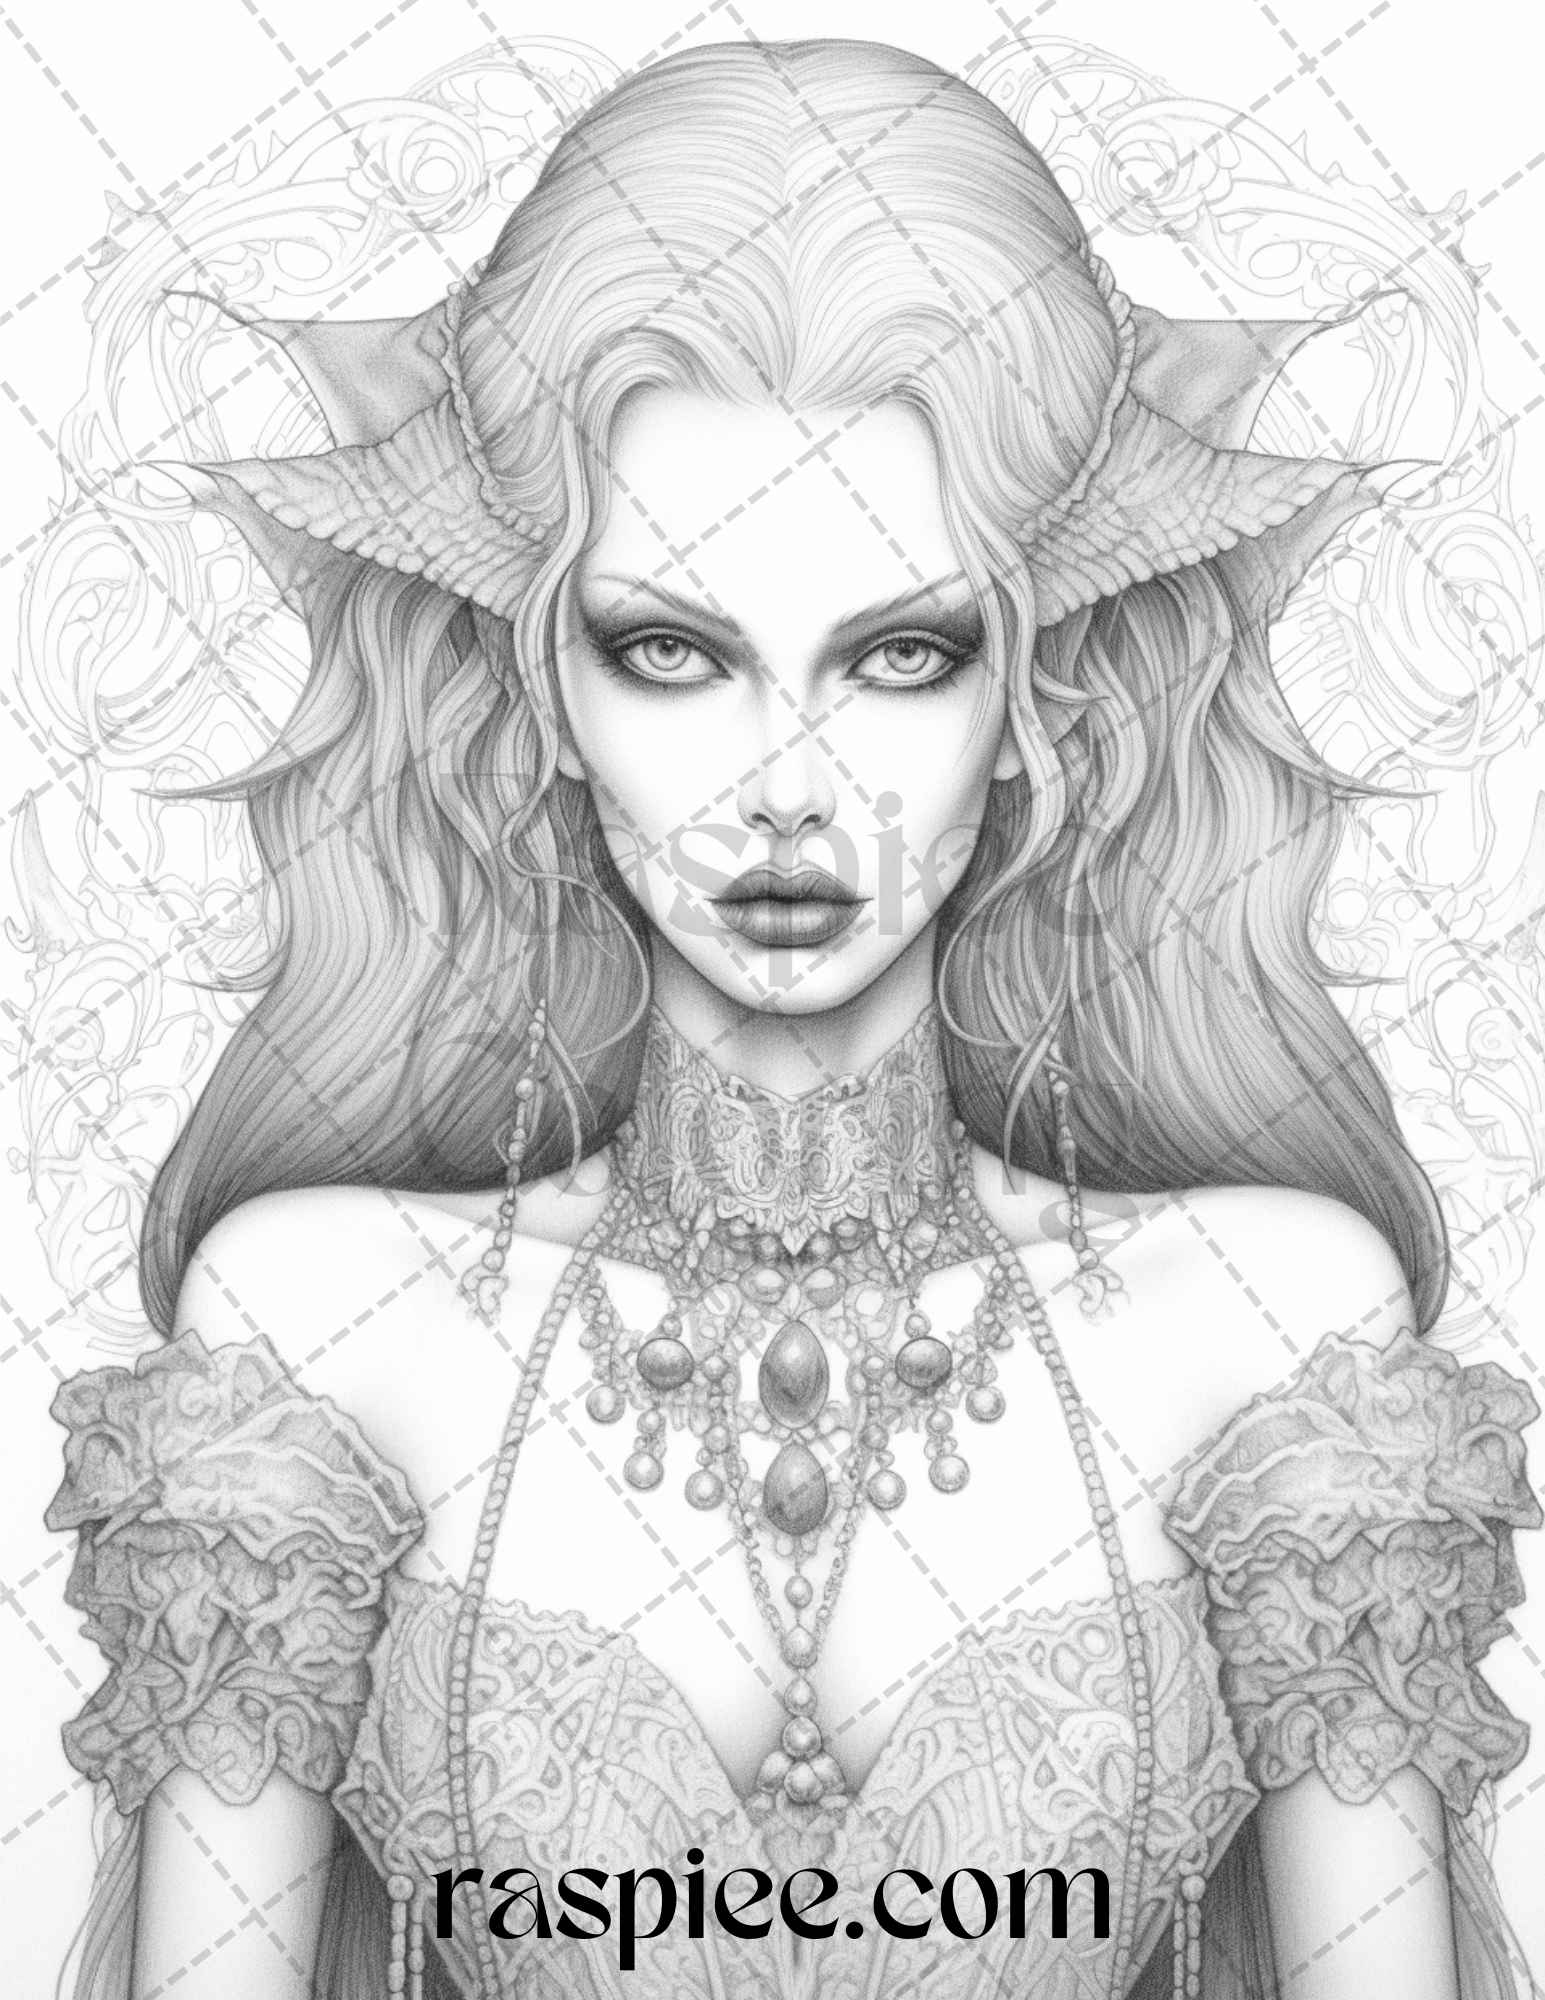 grayscale coloring pages, printable for adults, gothic vampire art, detailed illustrations, adult coloring book, Halloween coloring, fantasy creatures, spooky designs, dark fantasy, vampire theme, intricate artwork, printable grayscale pages, gothic art, supernatural coloring